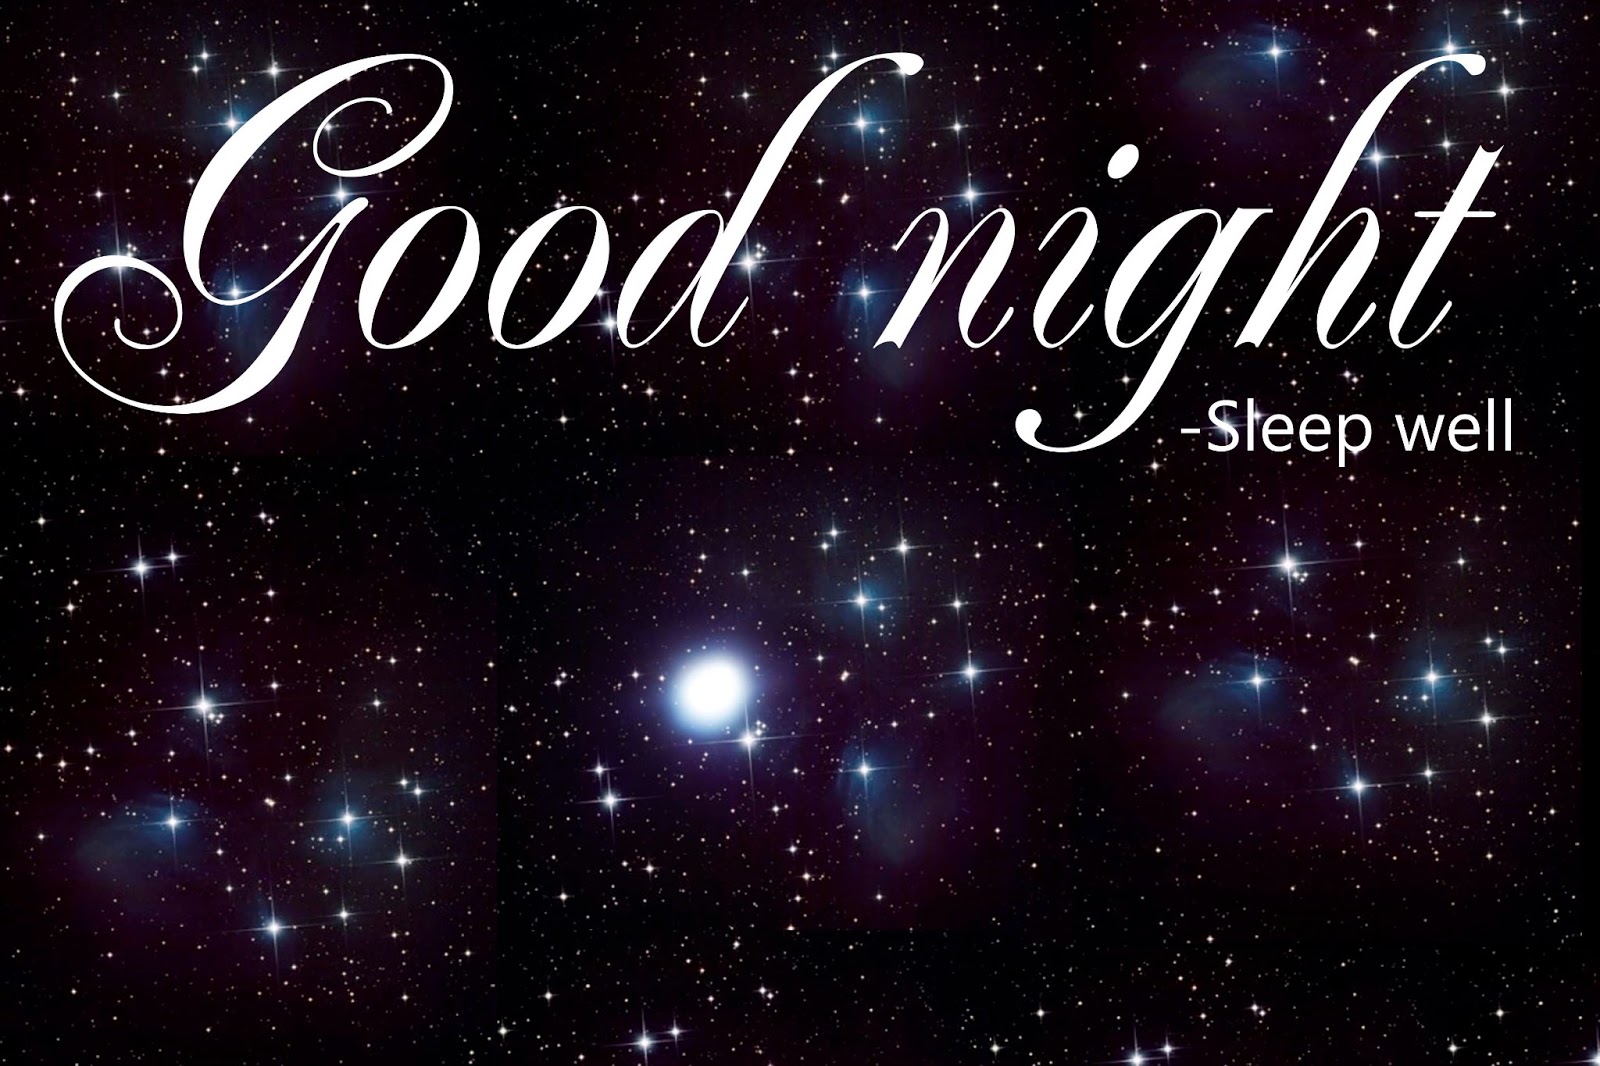 good night greetings quotes wishes hd wallpapers free download | Full ...